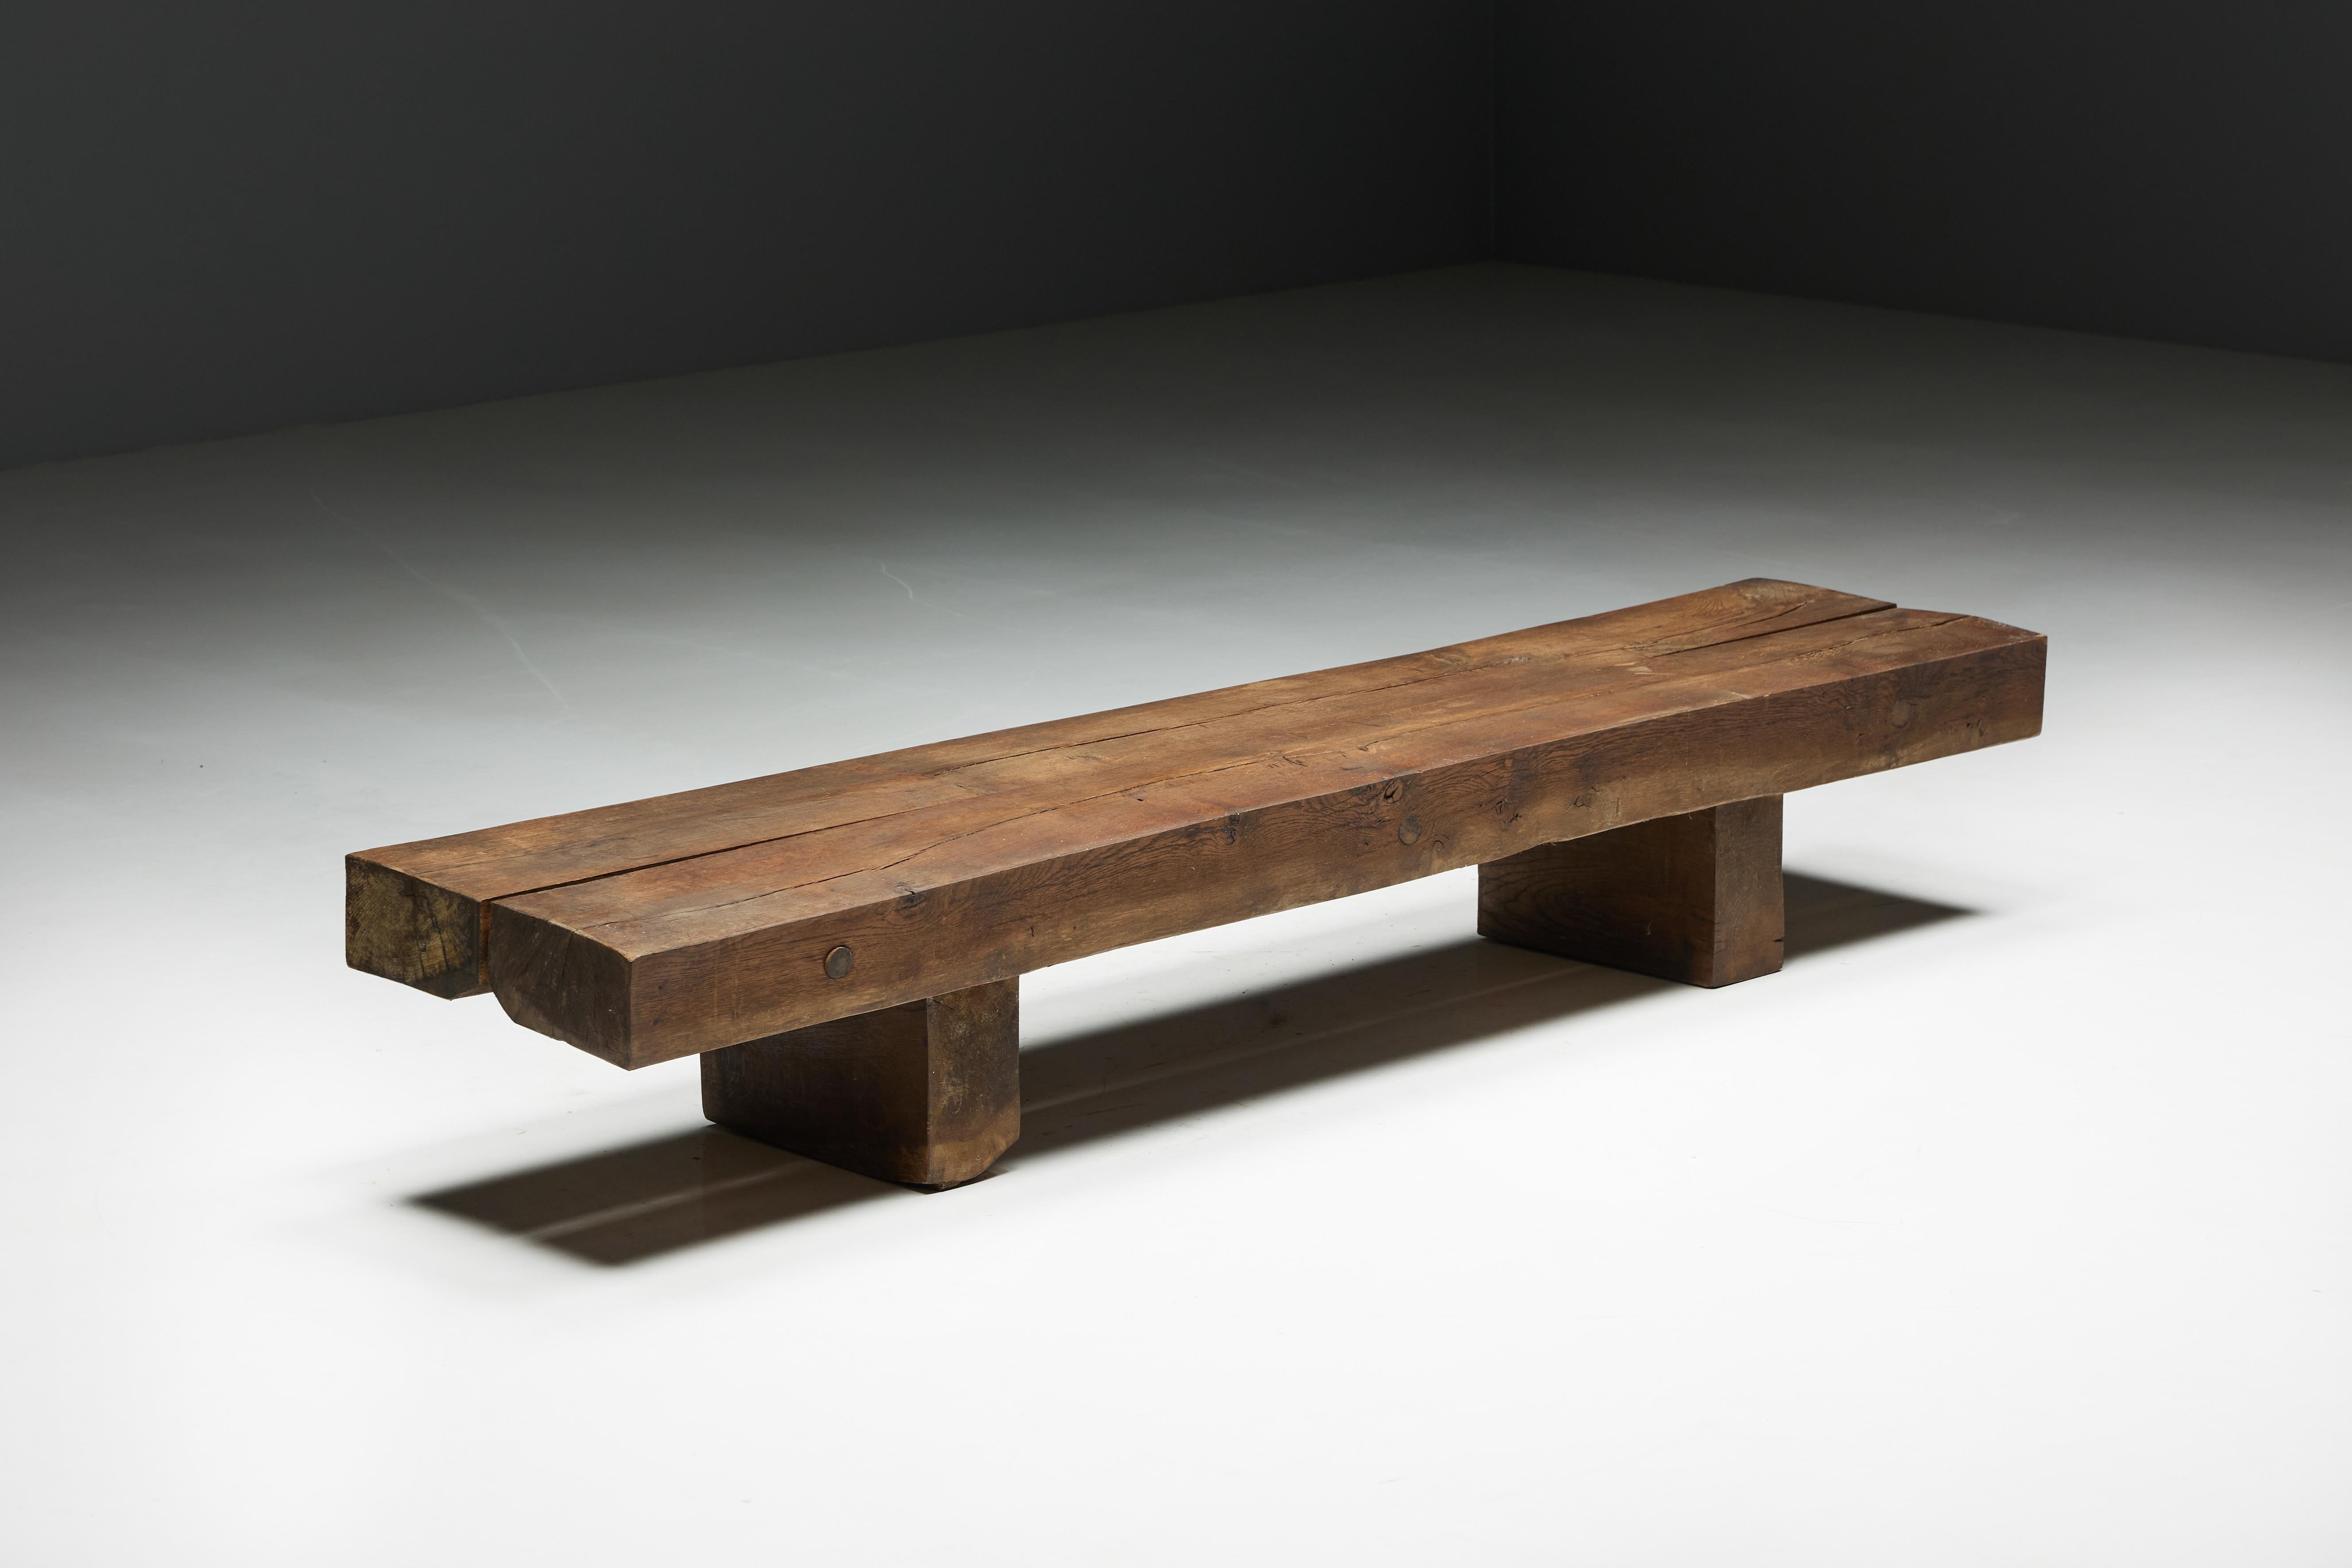 Wood Rectangular Brutalist Coffee Table, France, 1950s For Sale